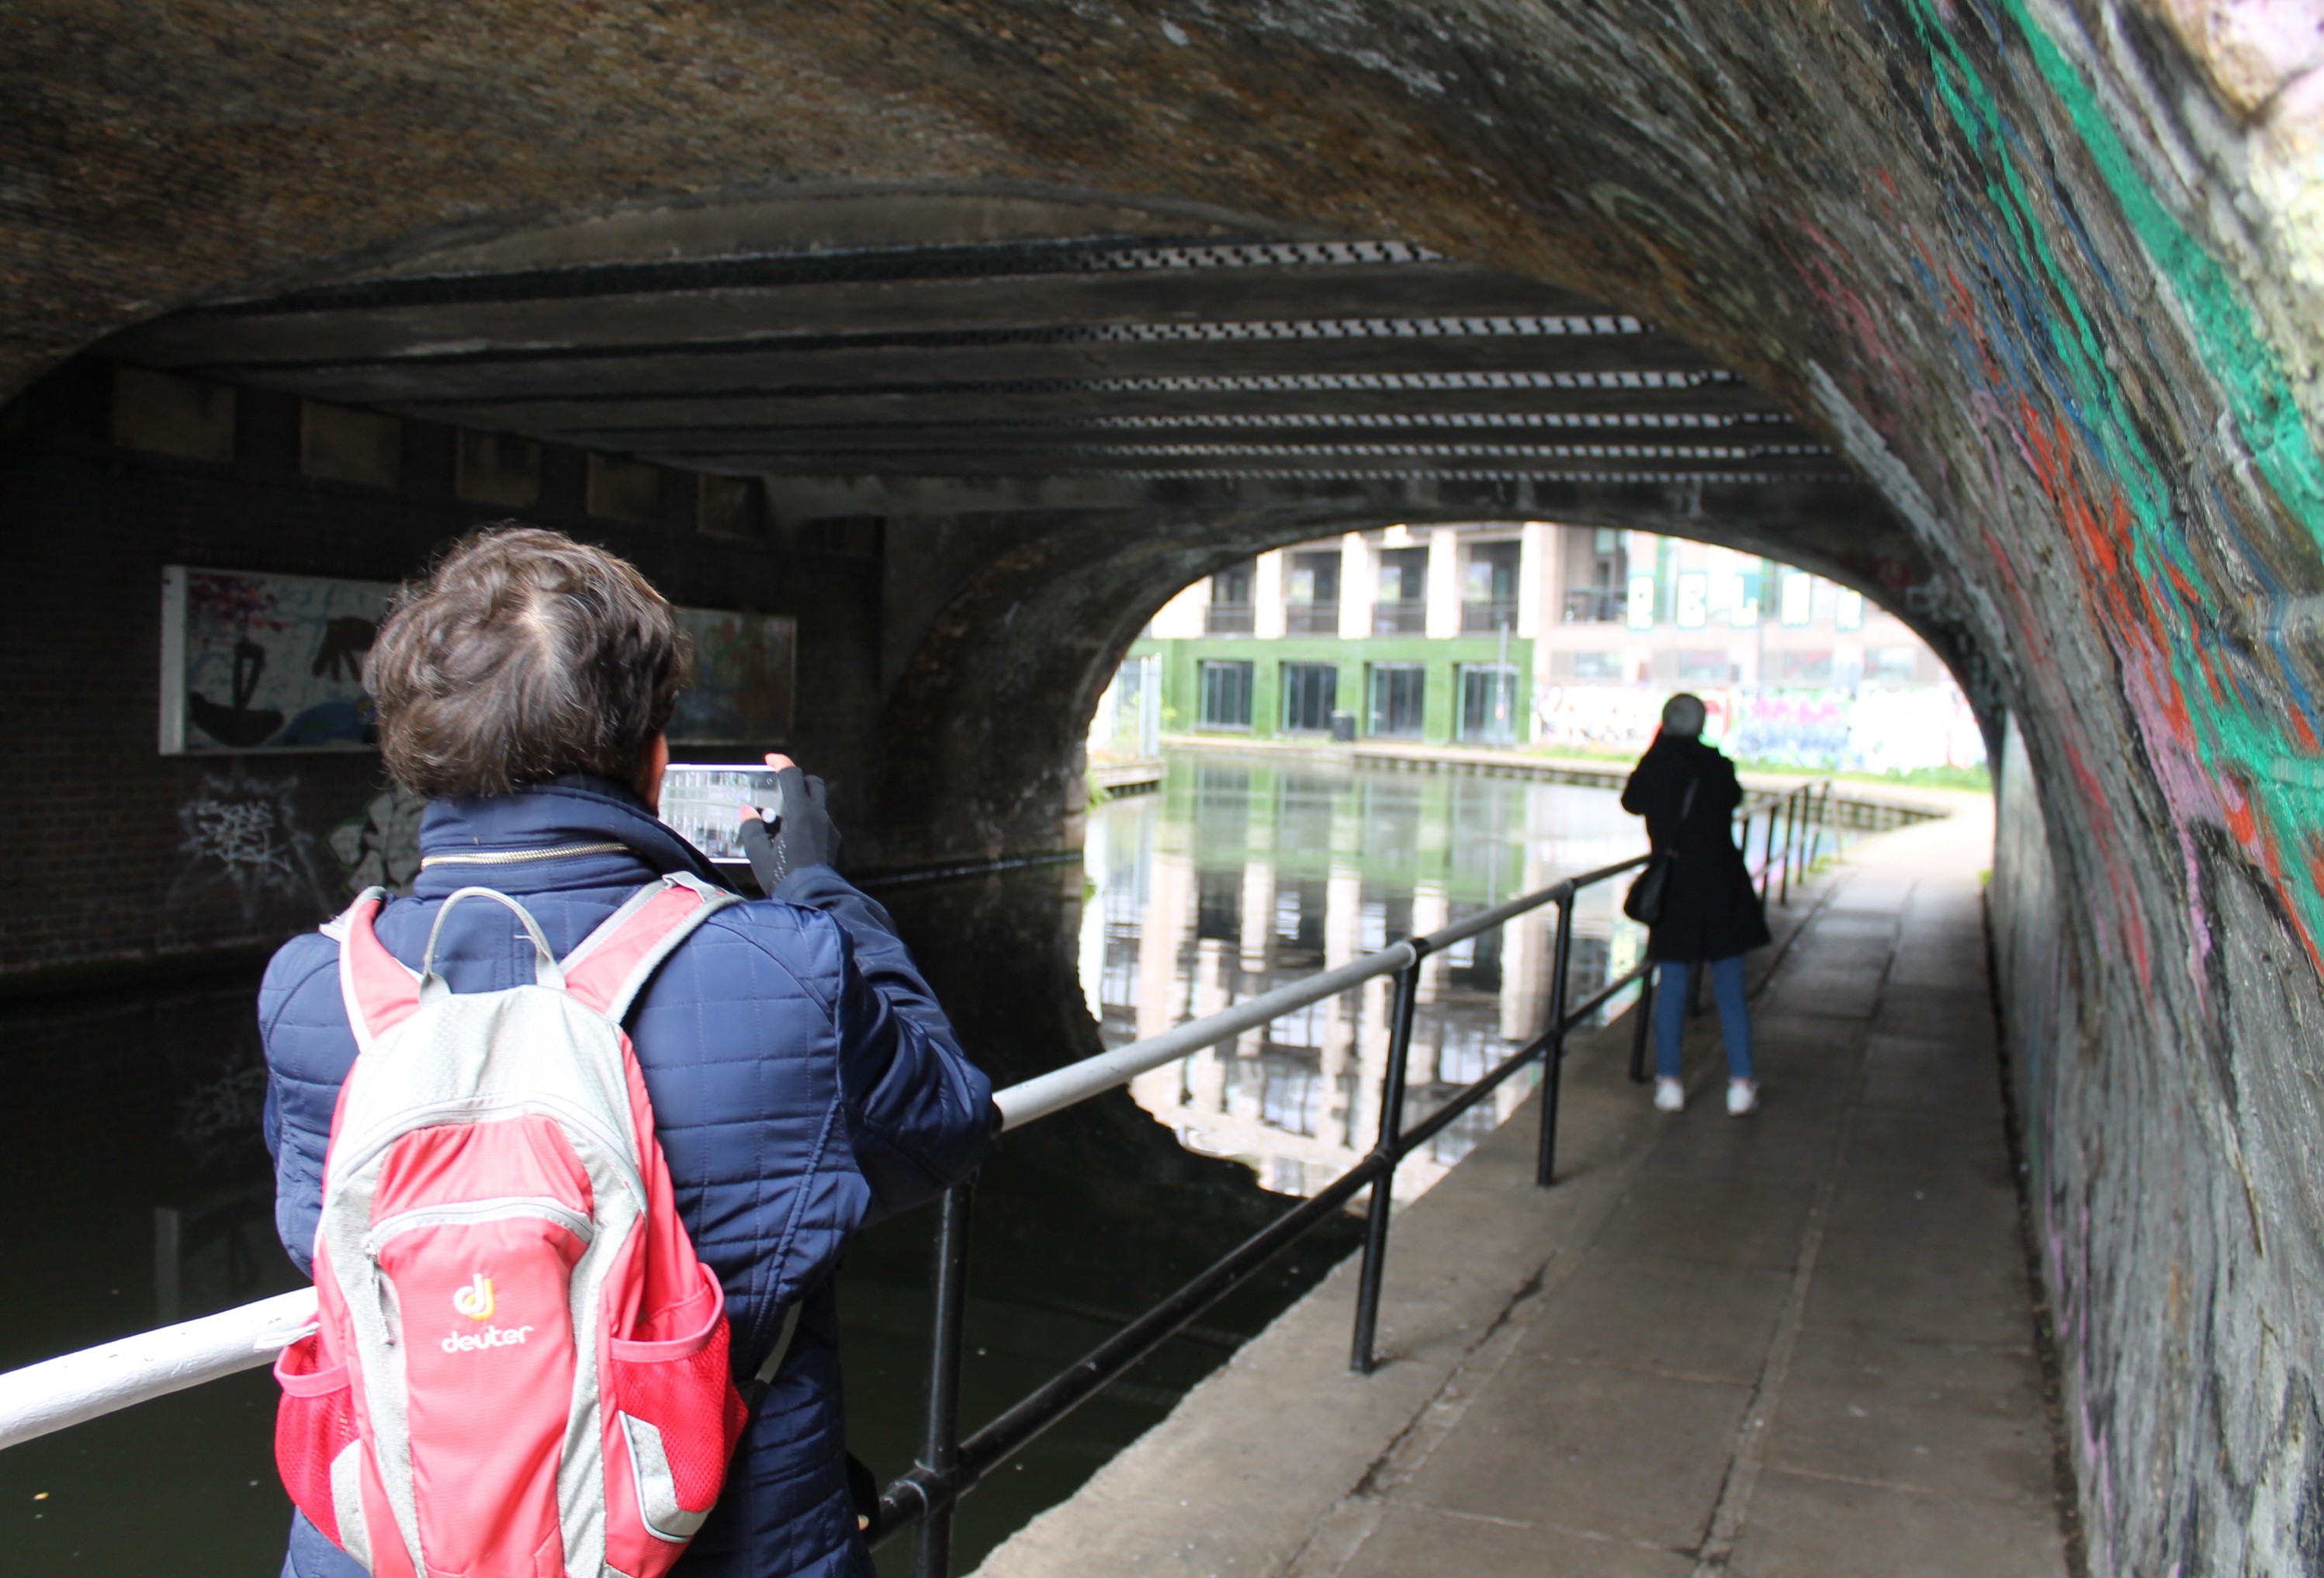 On the Regents Canal in Camden.